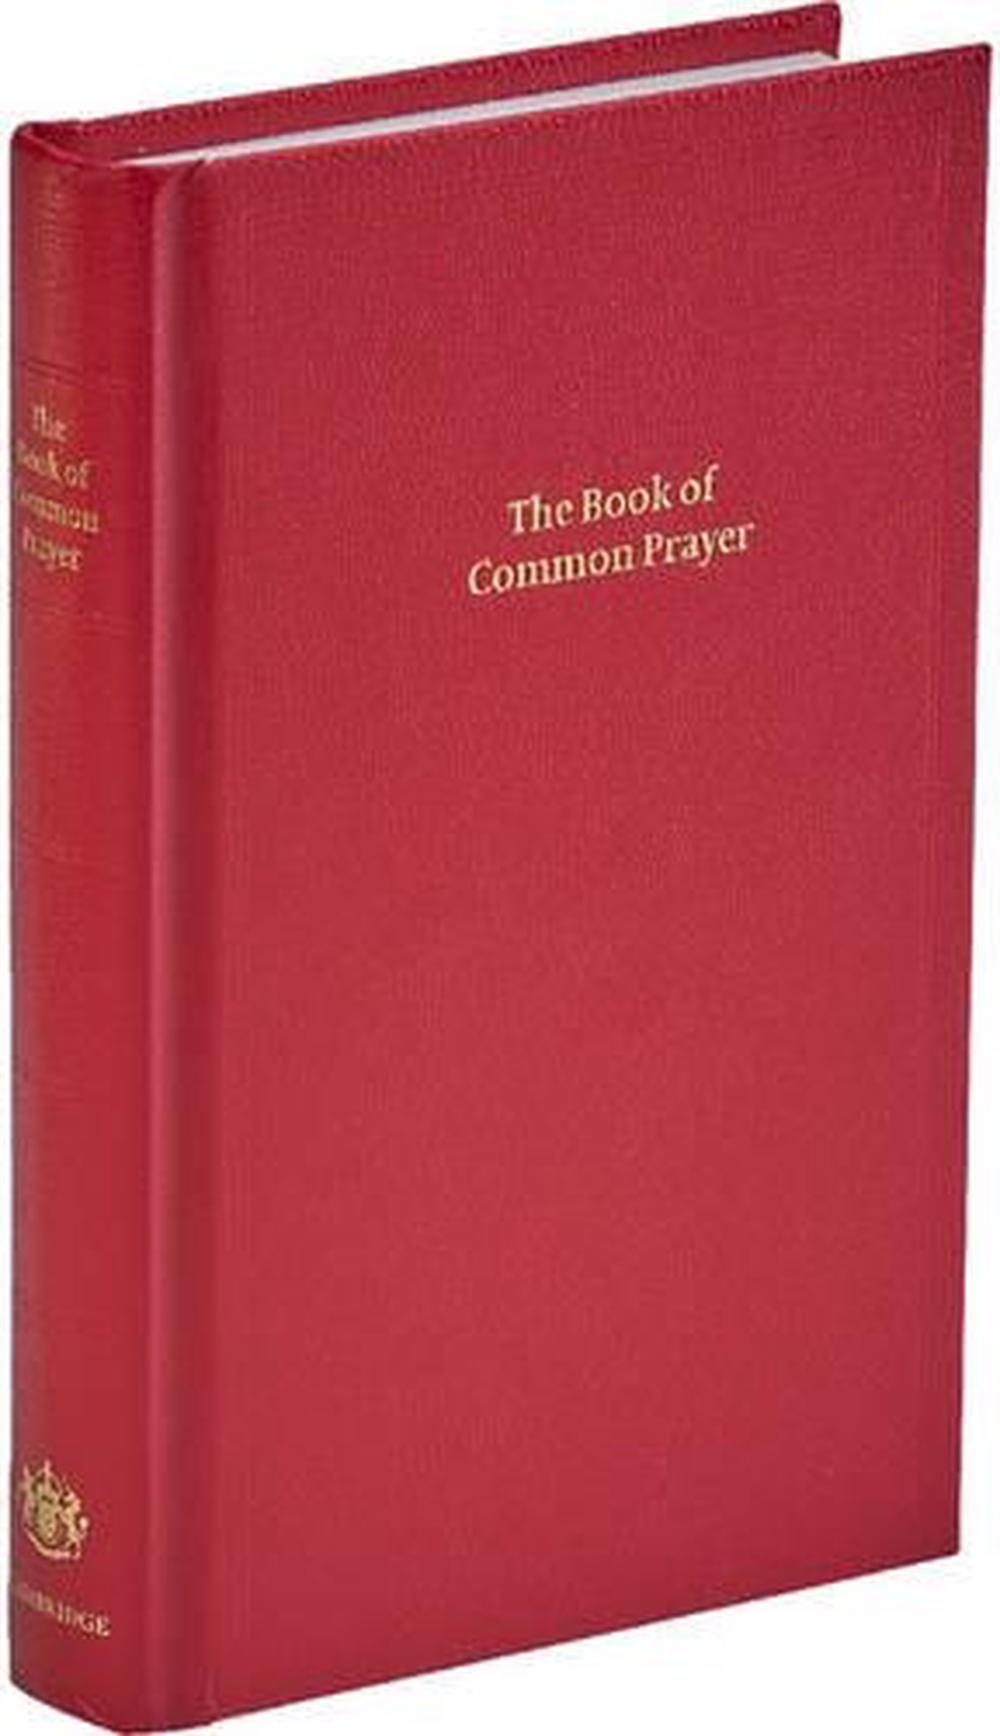 The Book of Common Prayer by Baker Publishing Group, Hardcover